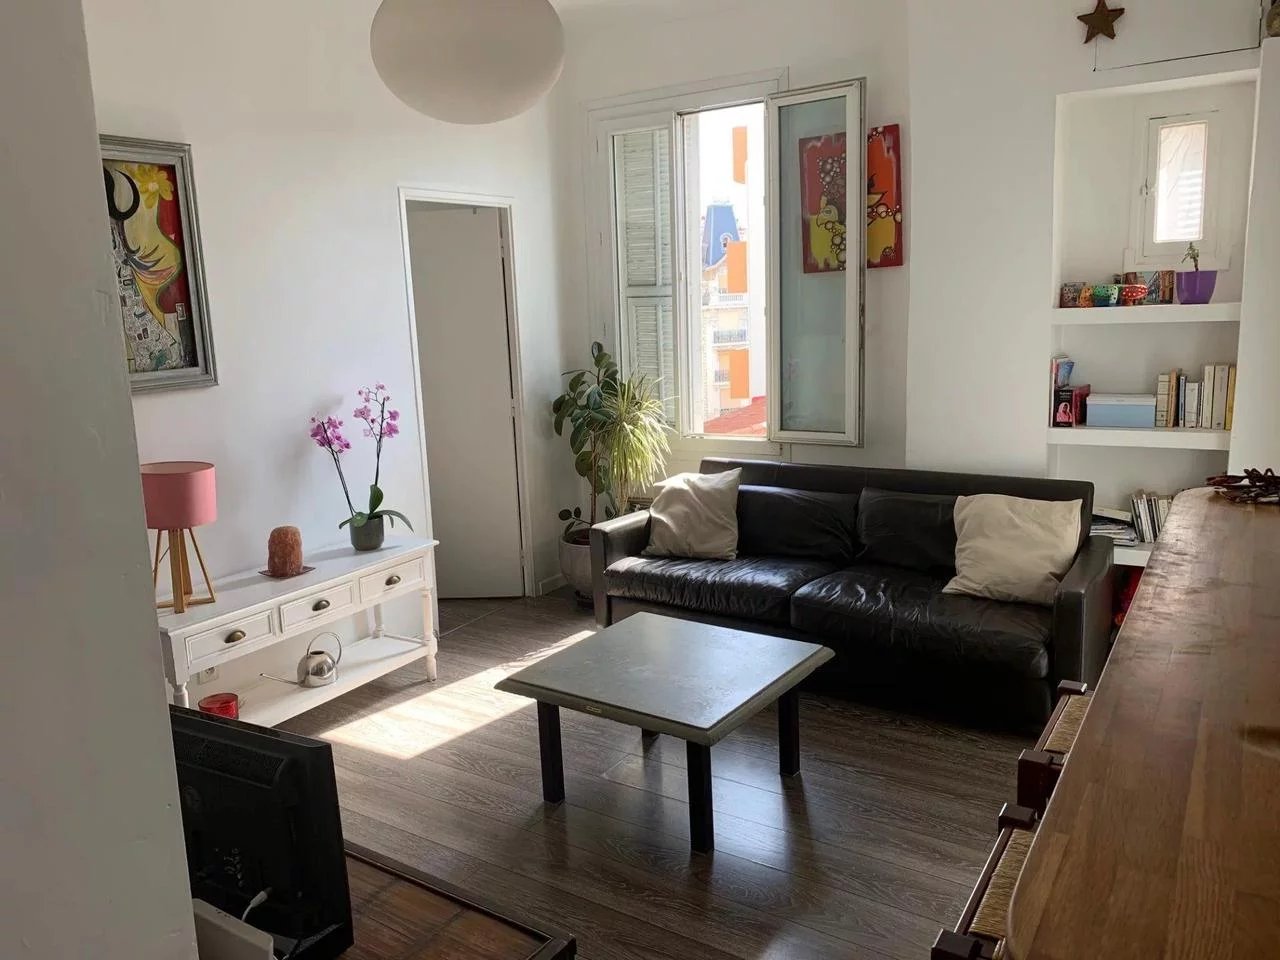 Appartement  3 Rooms 49m2  for sale   210 000 €